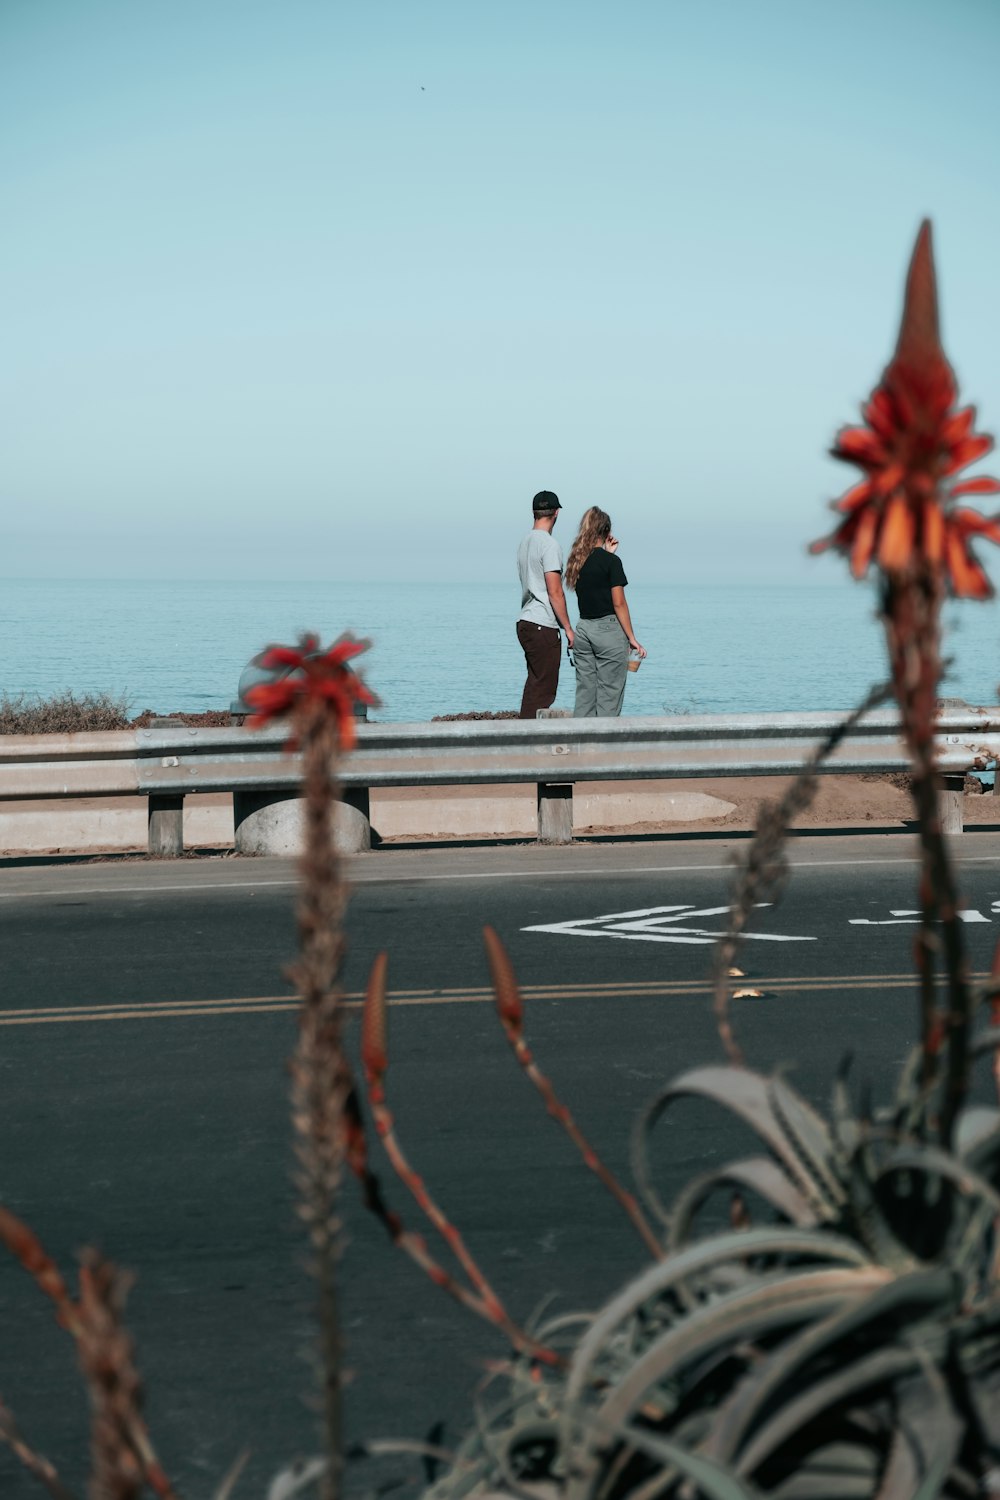 shallow focus photo of man and woman in front of body of water